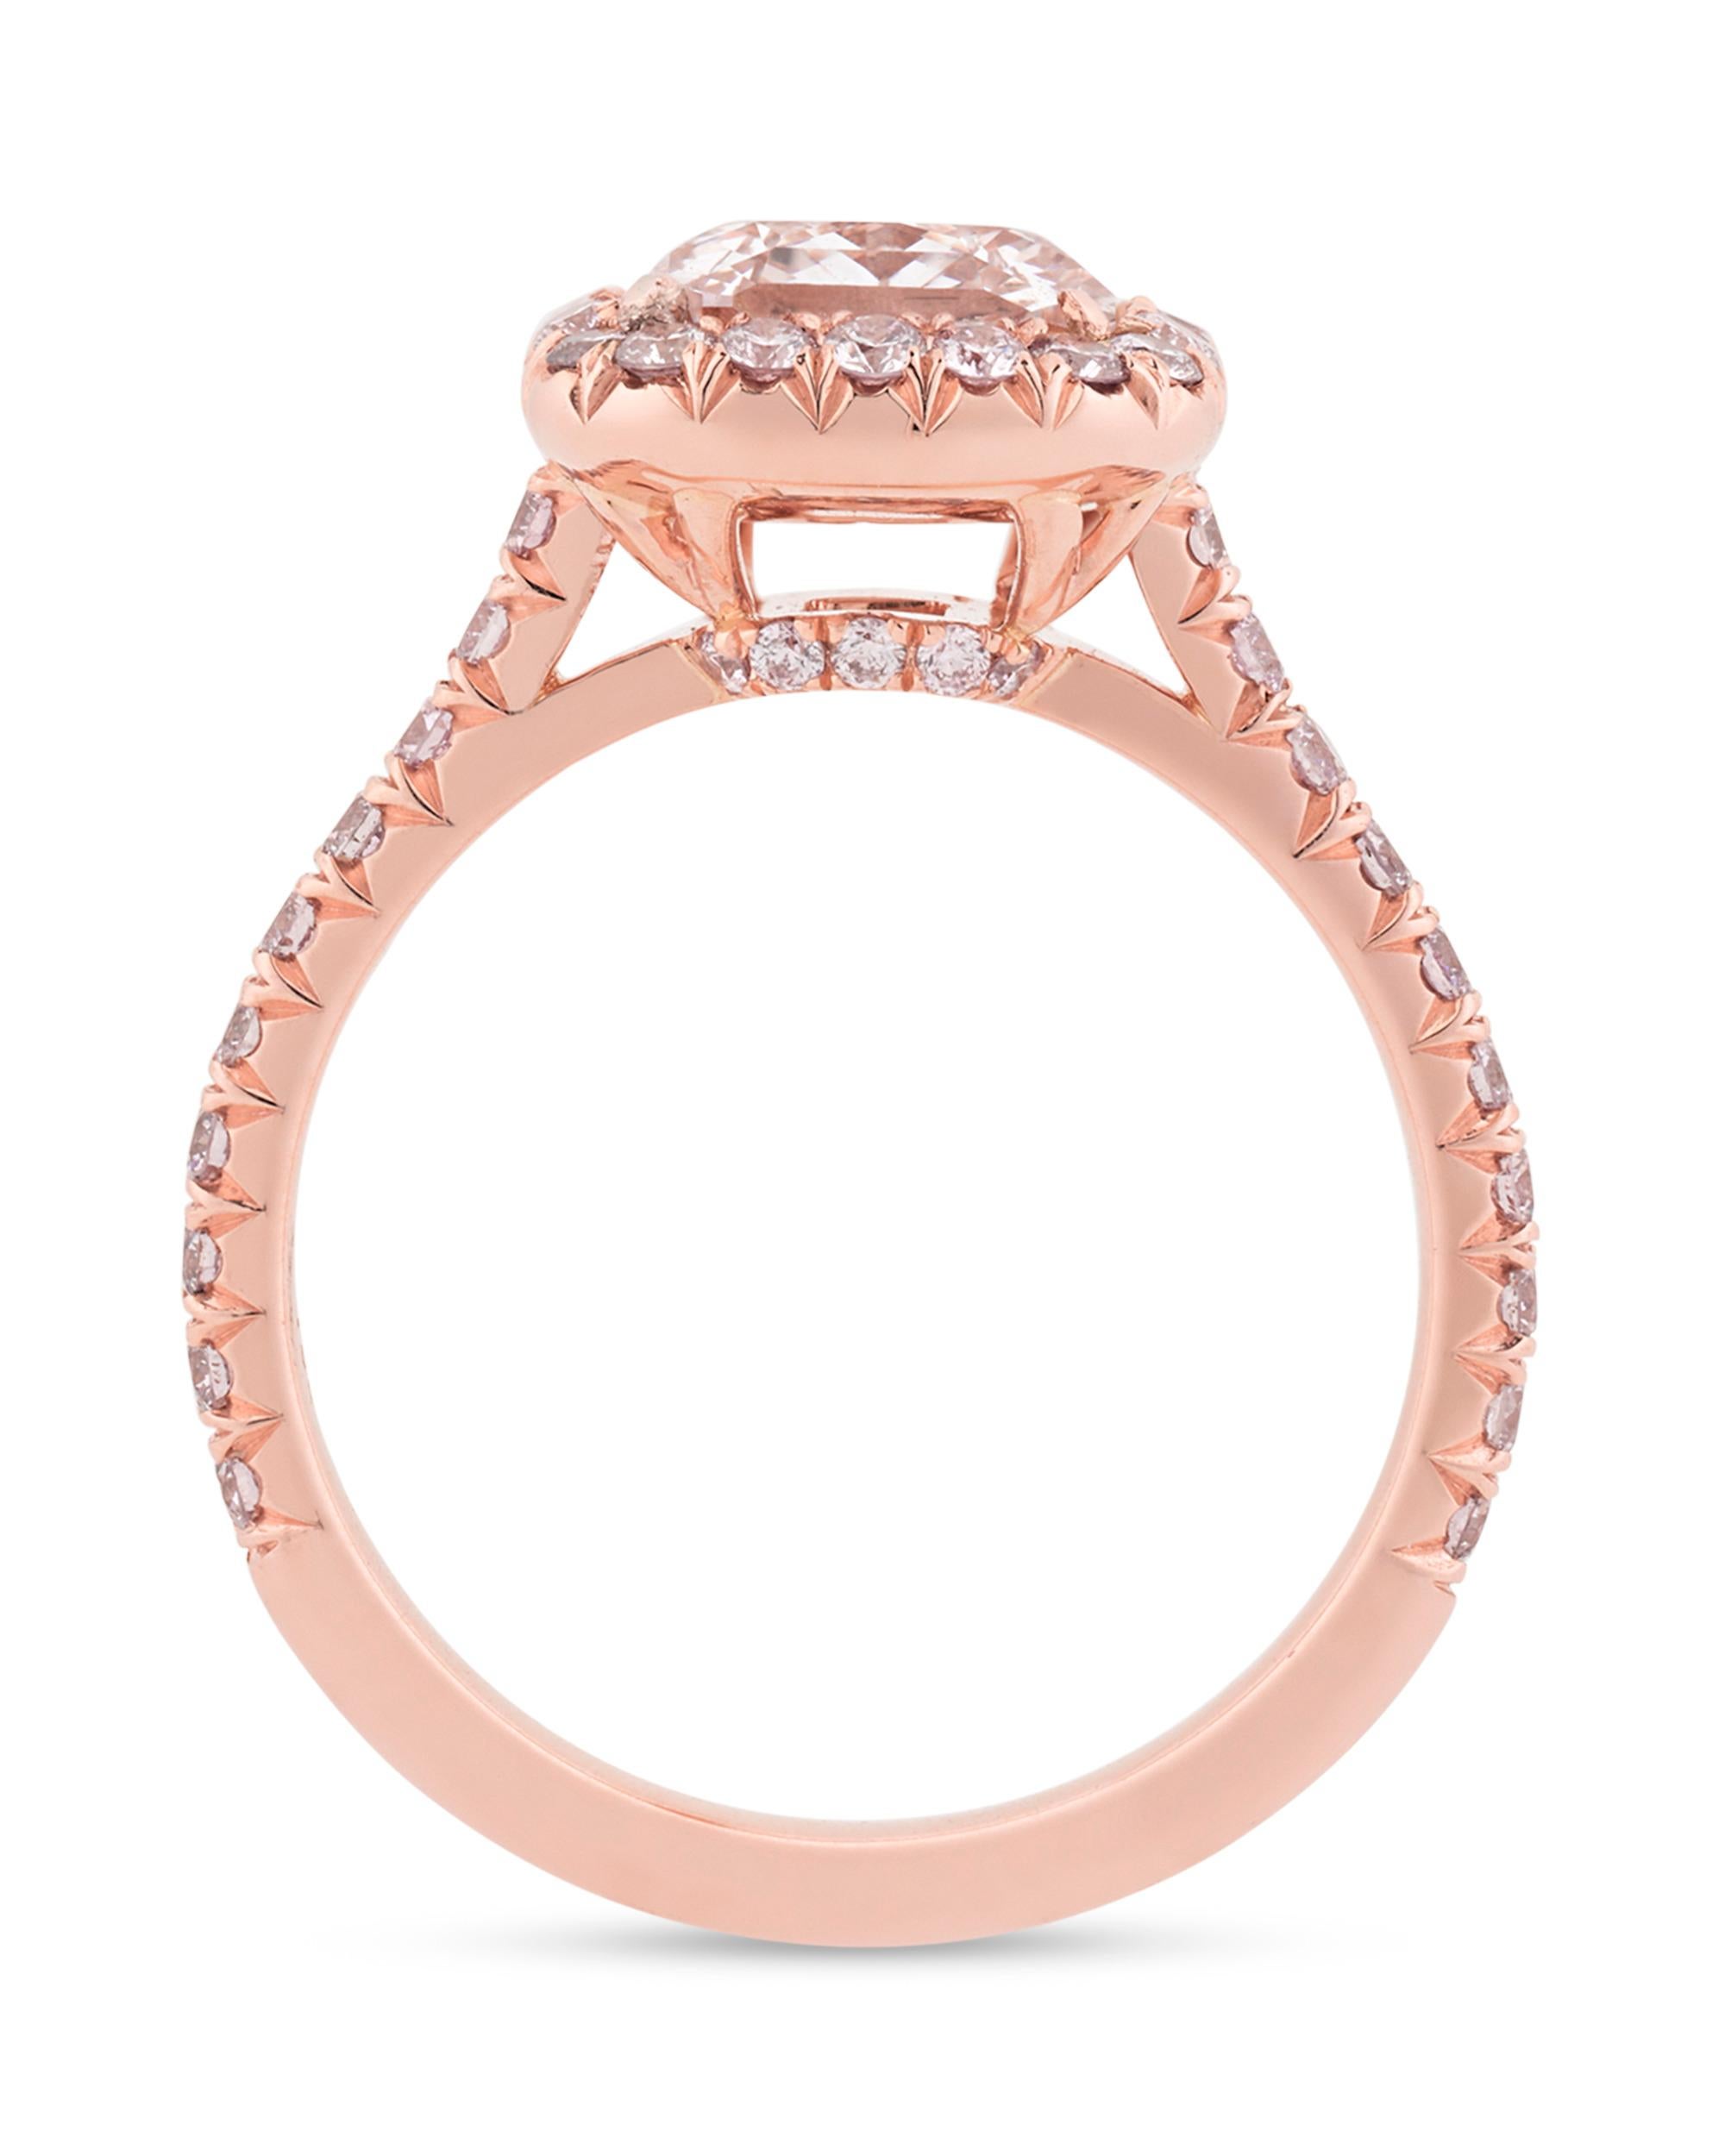 A remarkably rare and beautiful natural fancy pink diamond totaling 2.01 carats centers this breathtaking ring. Mounted in an elegant 18K rose gold setting, approximately 0.65 carats of dazzling light pink pave-cut diamonds accent this stunning